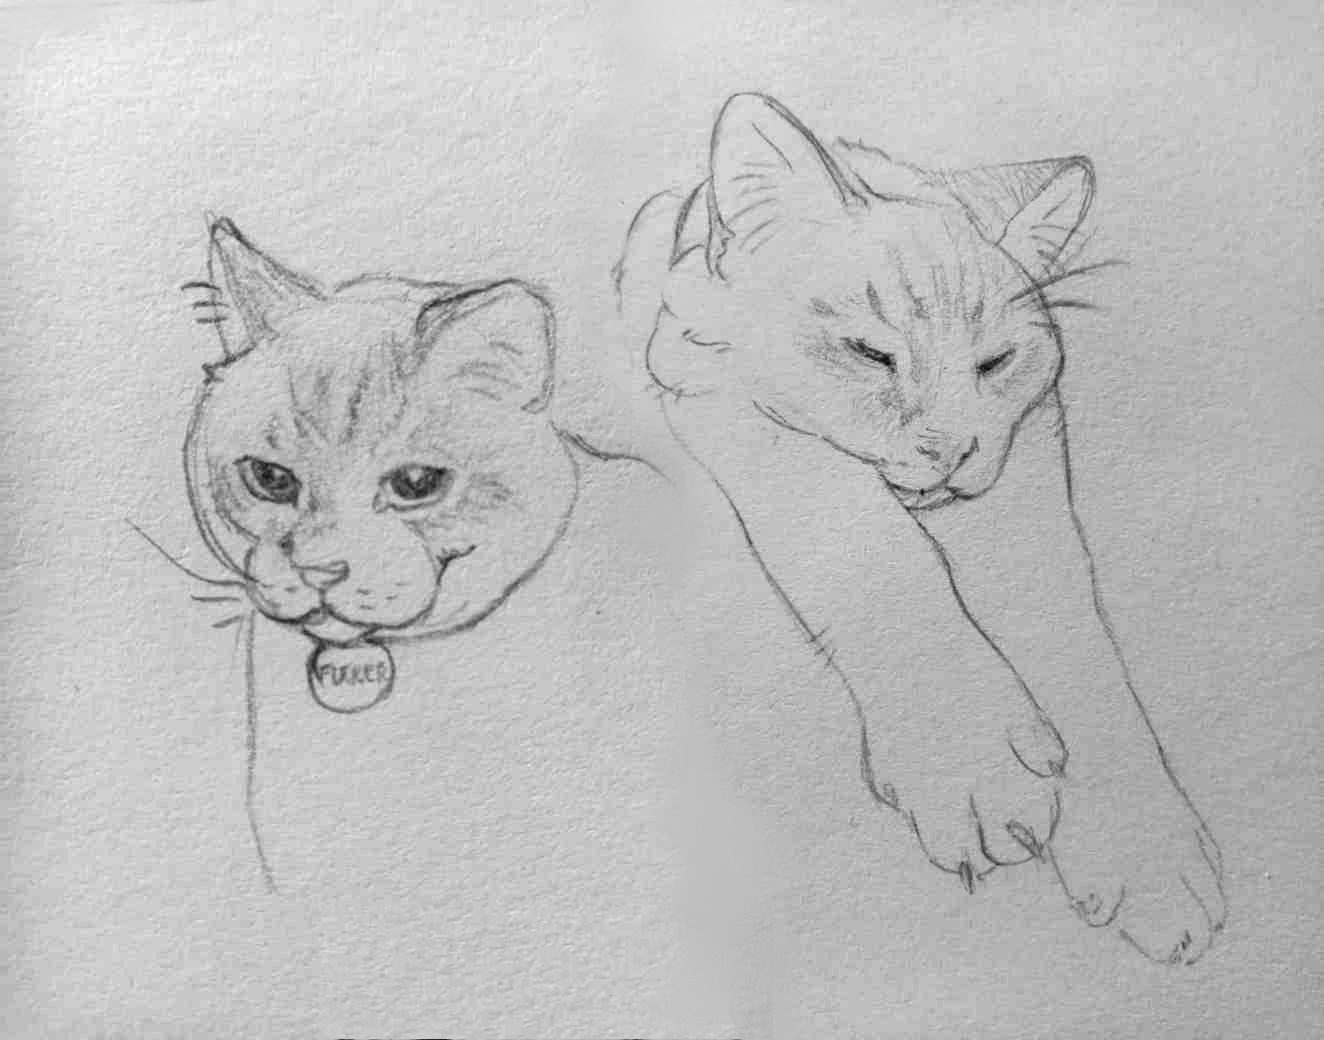 A couple of pencil portraits of a cat with stripes on his face and darker ears. In the first one it's just him looking at the camera. He has a badge that says fucker. The second drawing shows him with his paws stretched, laying his head on them